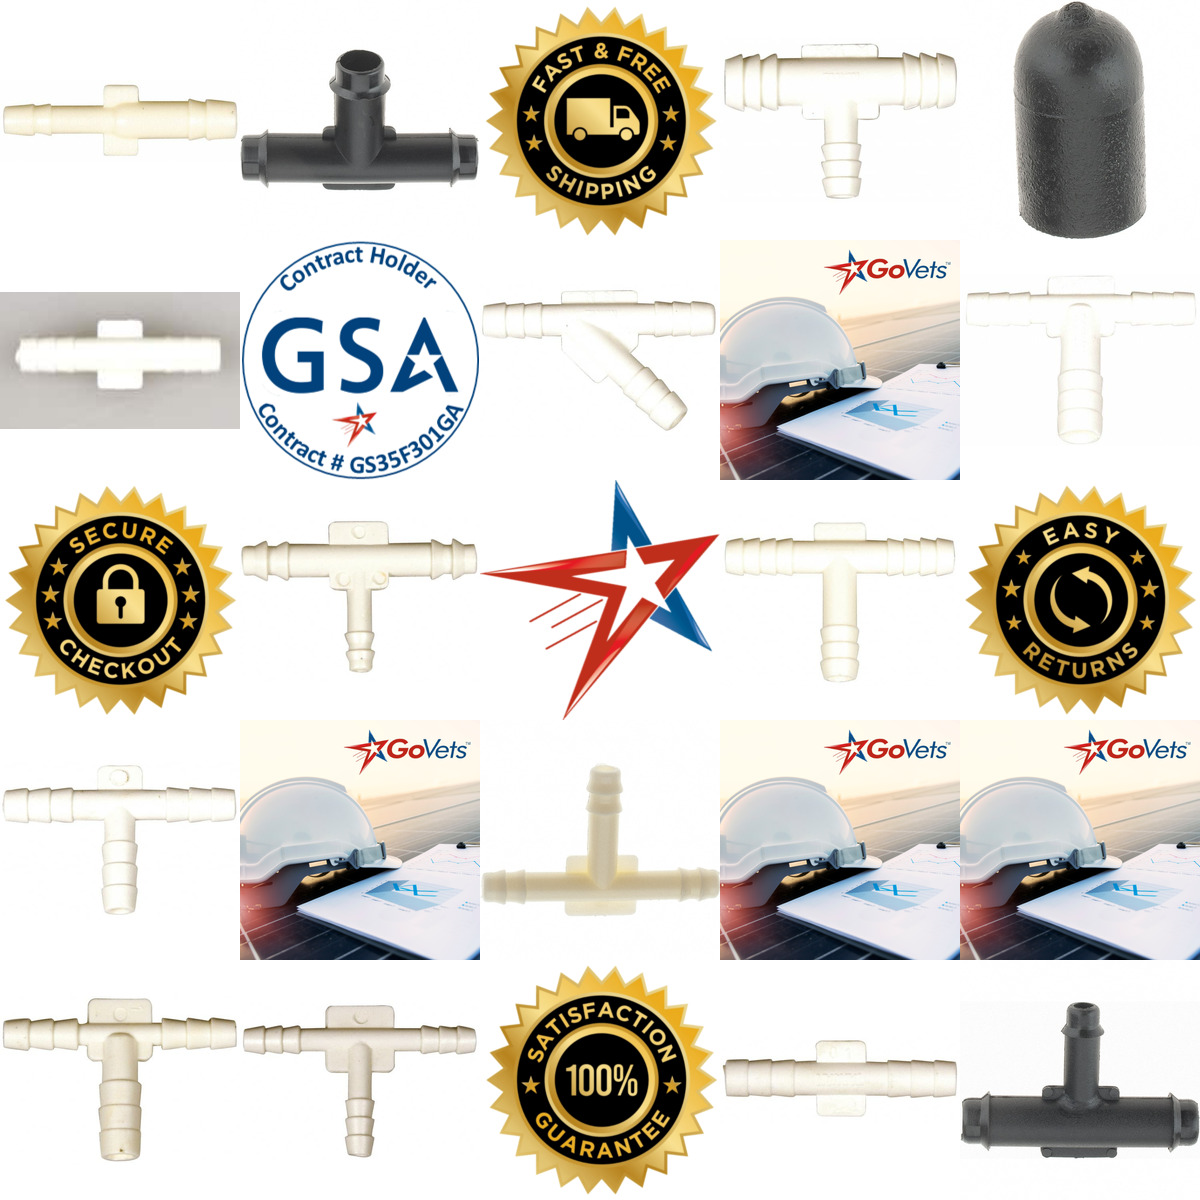 A selection of Automotive Vacuum Fittings products on GoVets